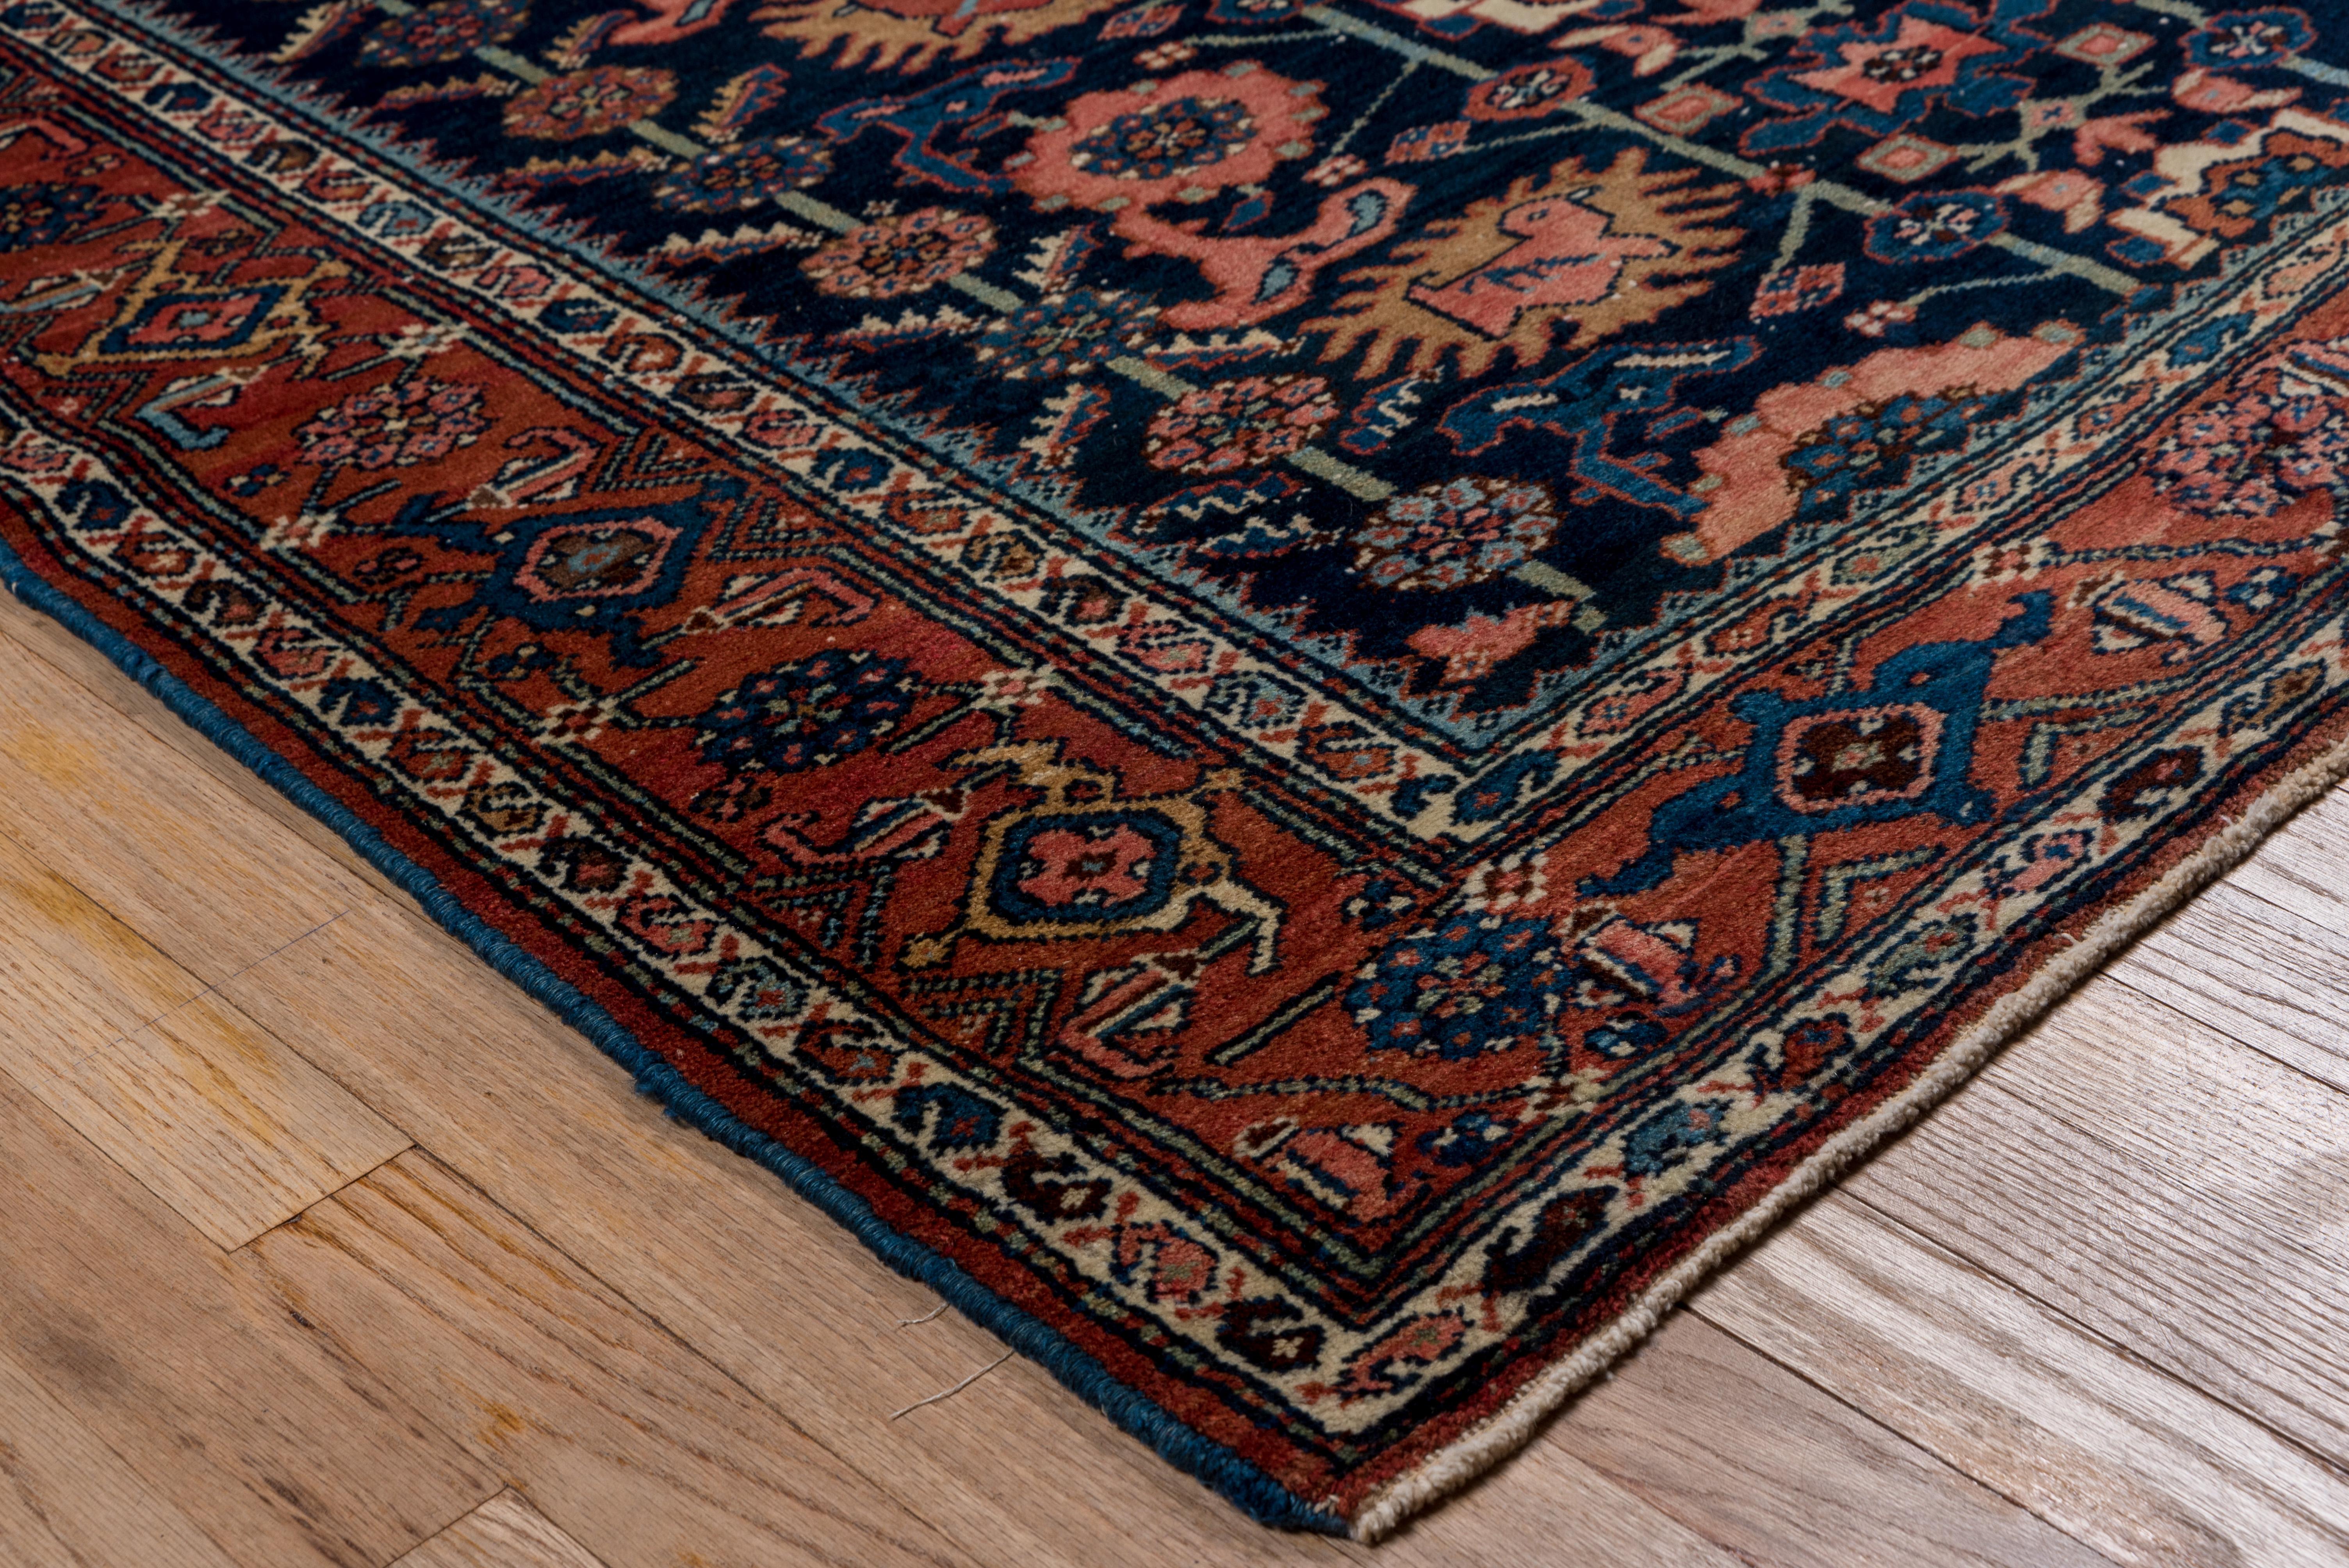 The navy field of this particularly compactly woven west Persian village scatter has a variant of the traditional Avshan design with rotund birds in several of the fringed motives, along with the usual rosettes and 